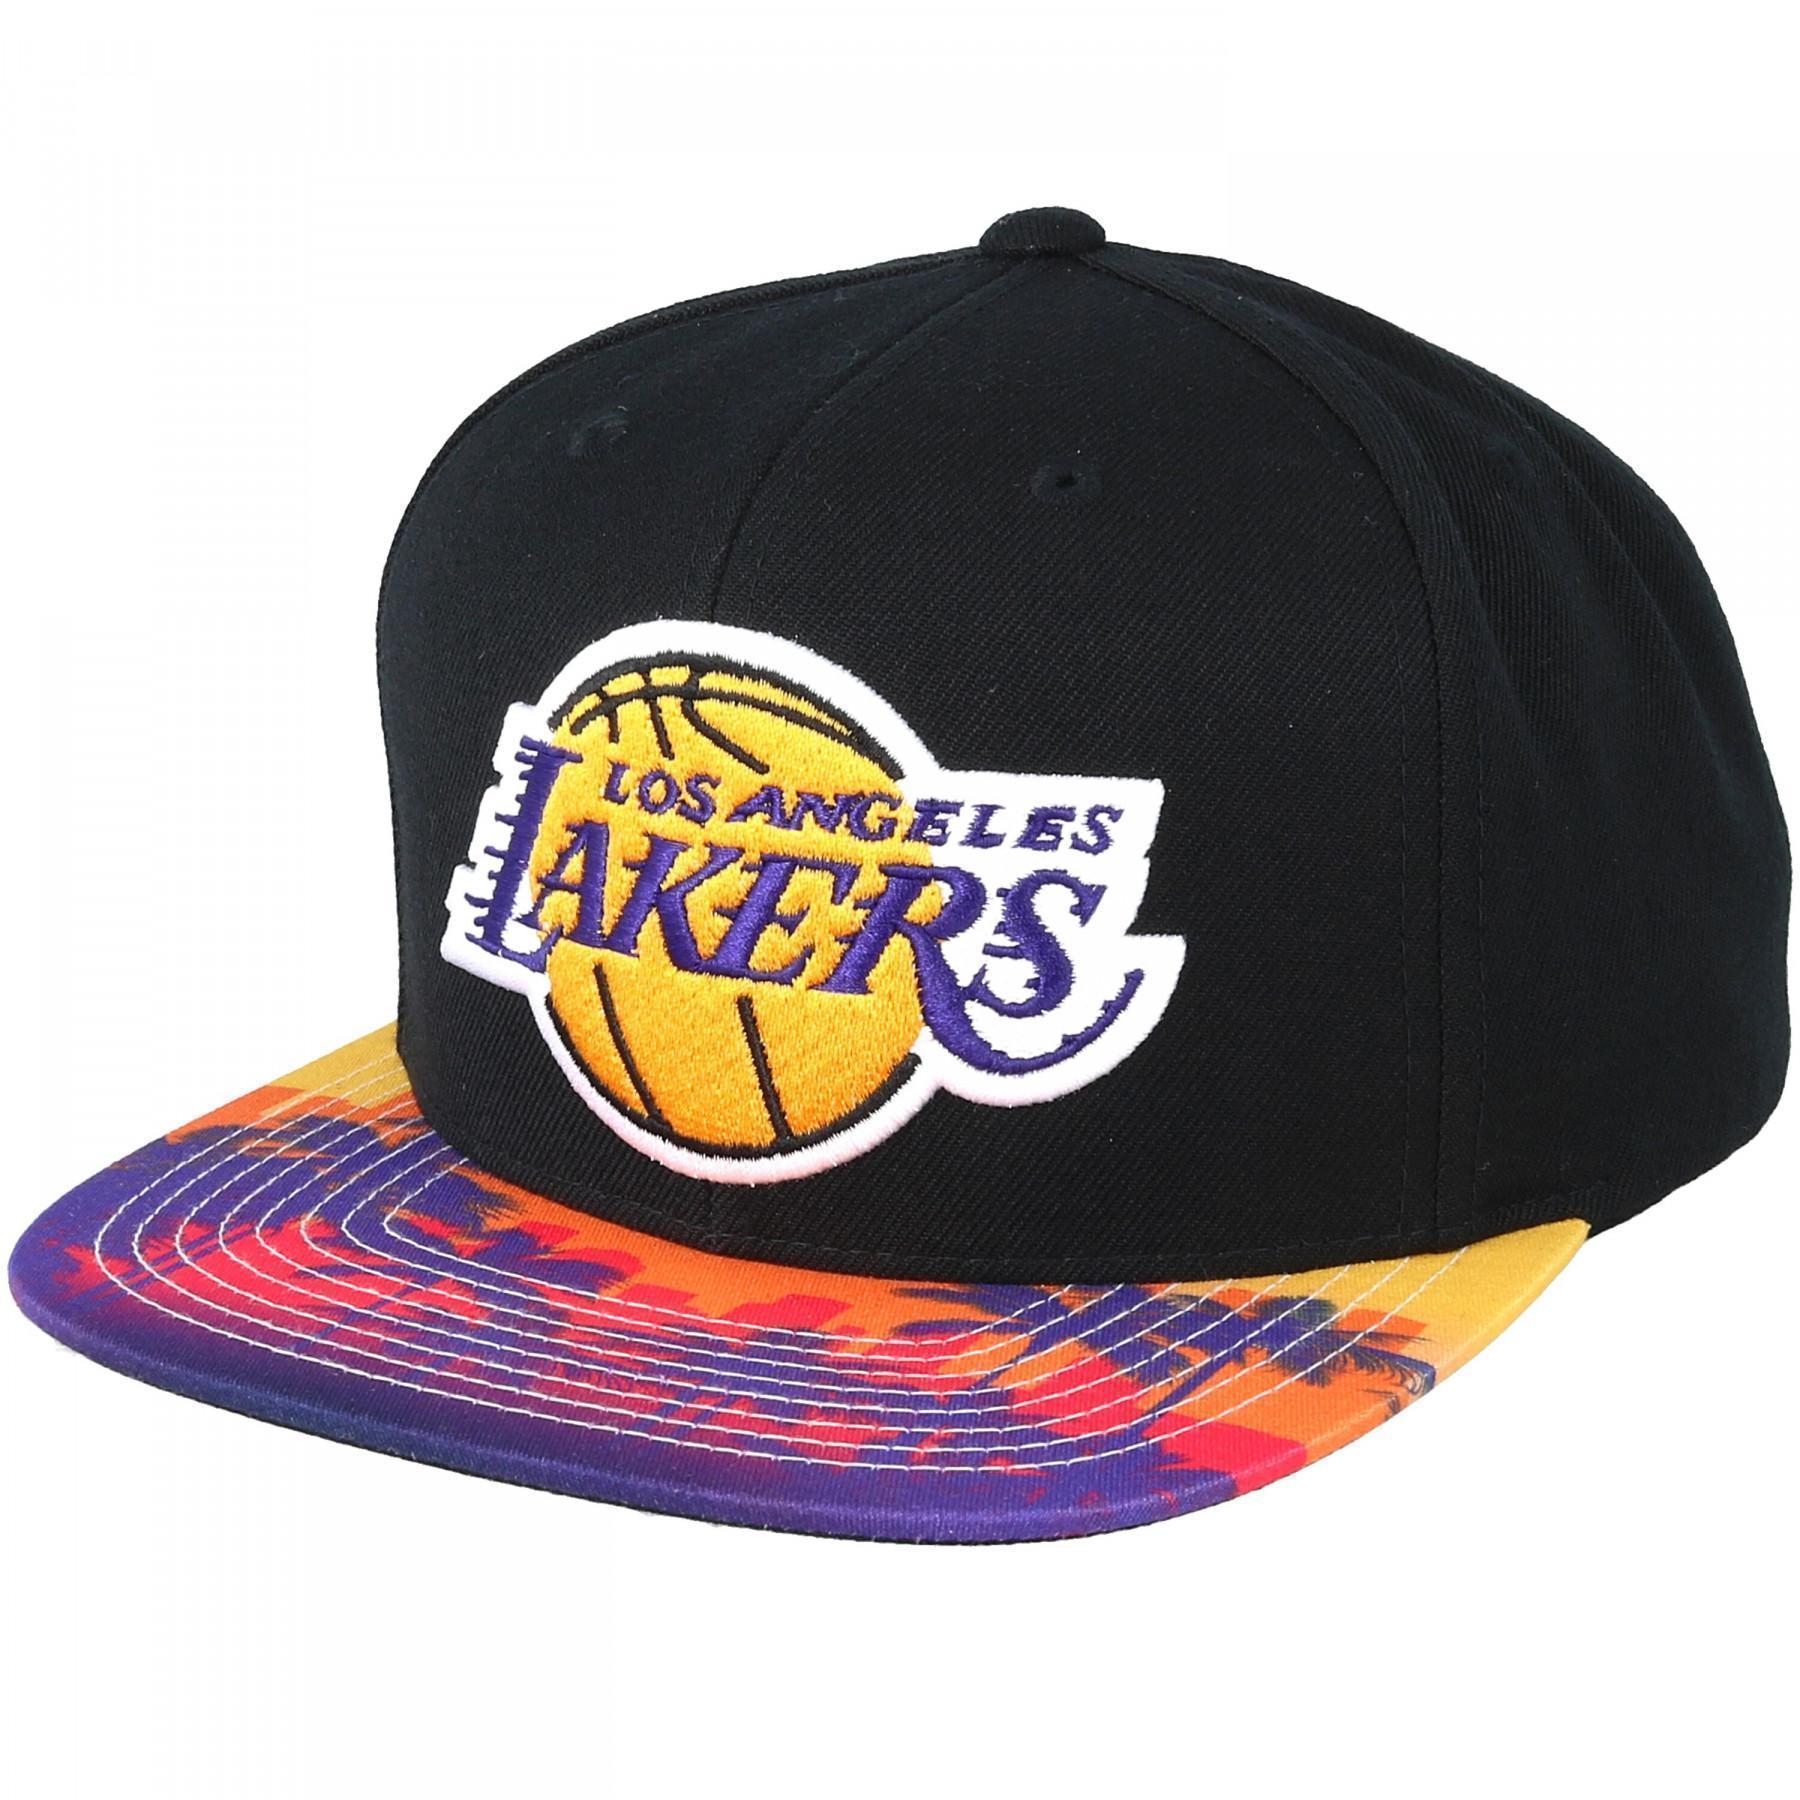 Cap Mitchell & Ness Team Arch Tone Lakers